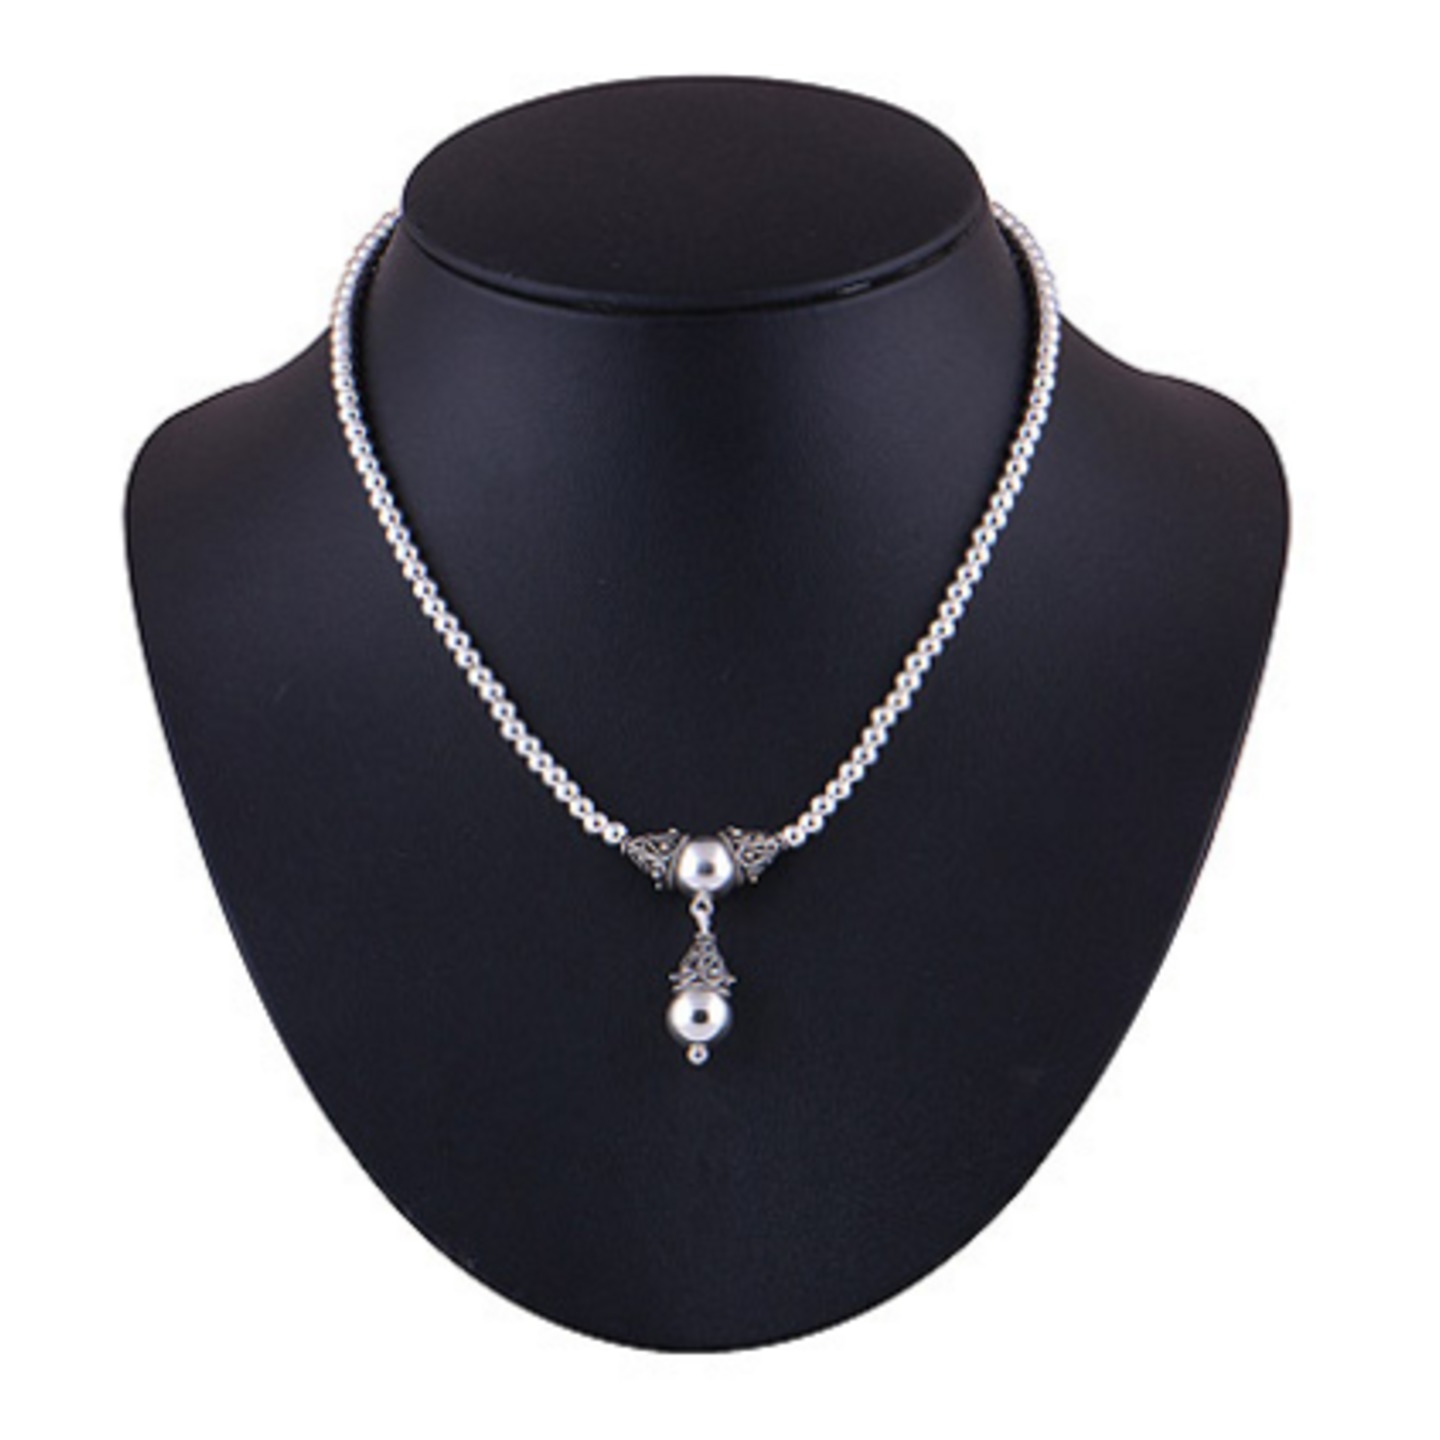 The Droplet Silver Necklace